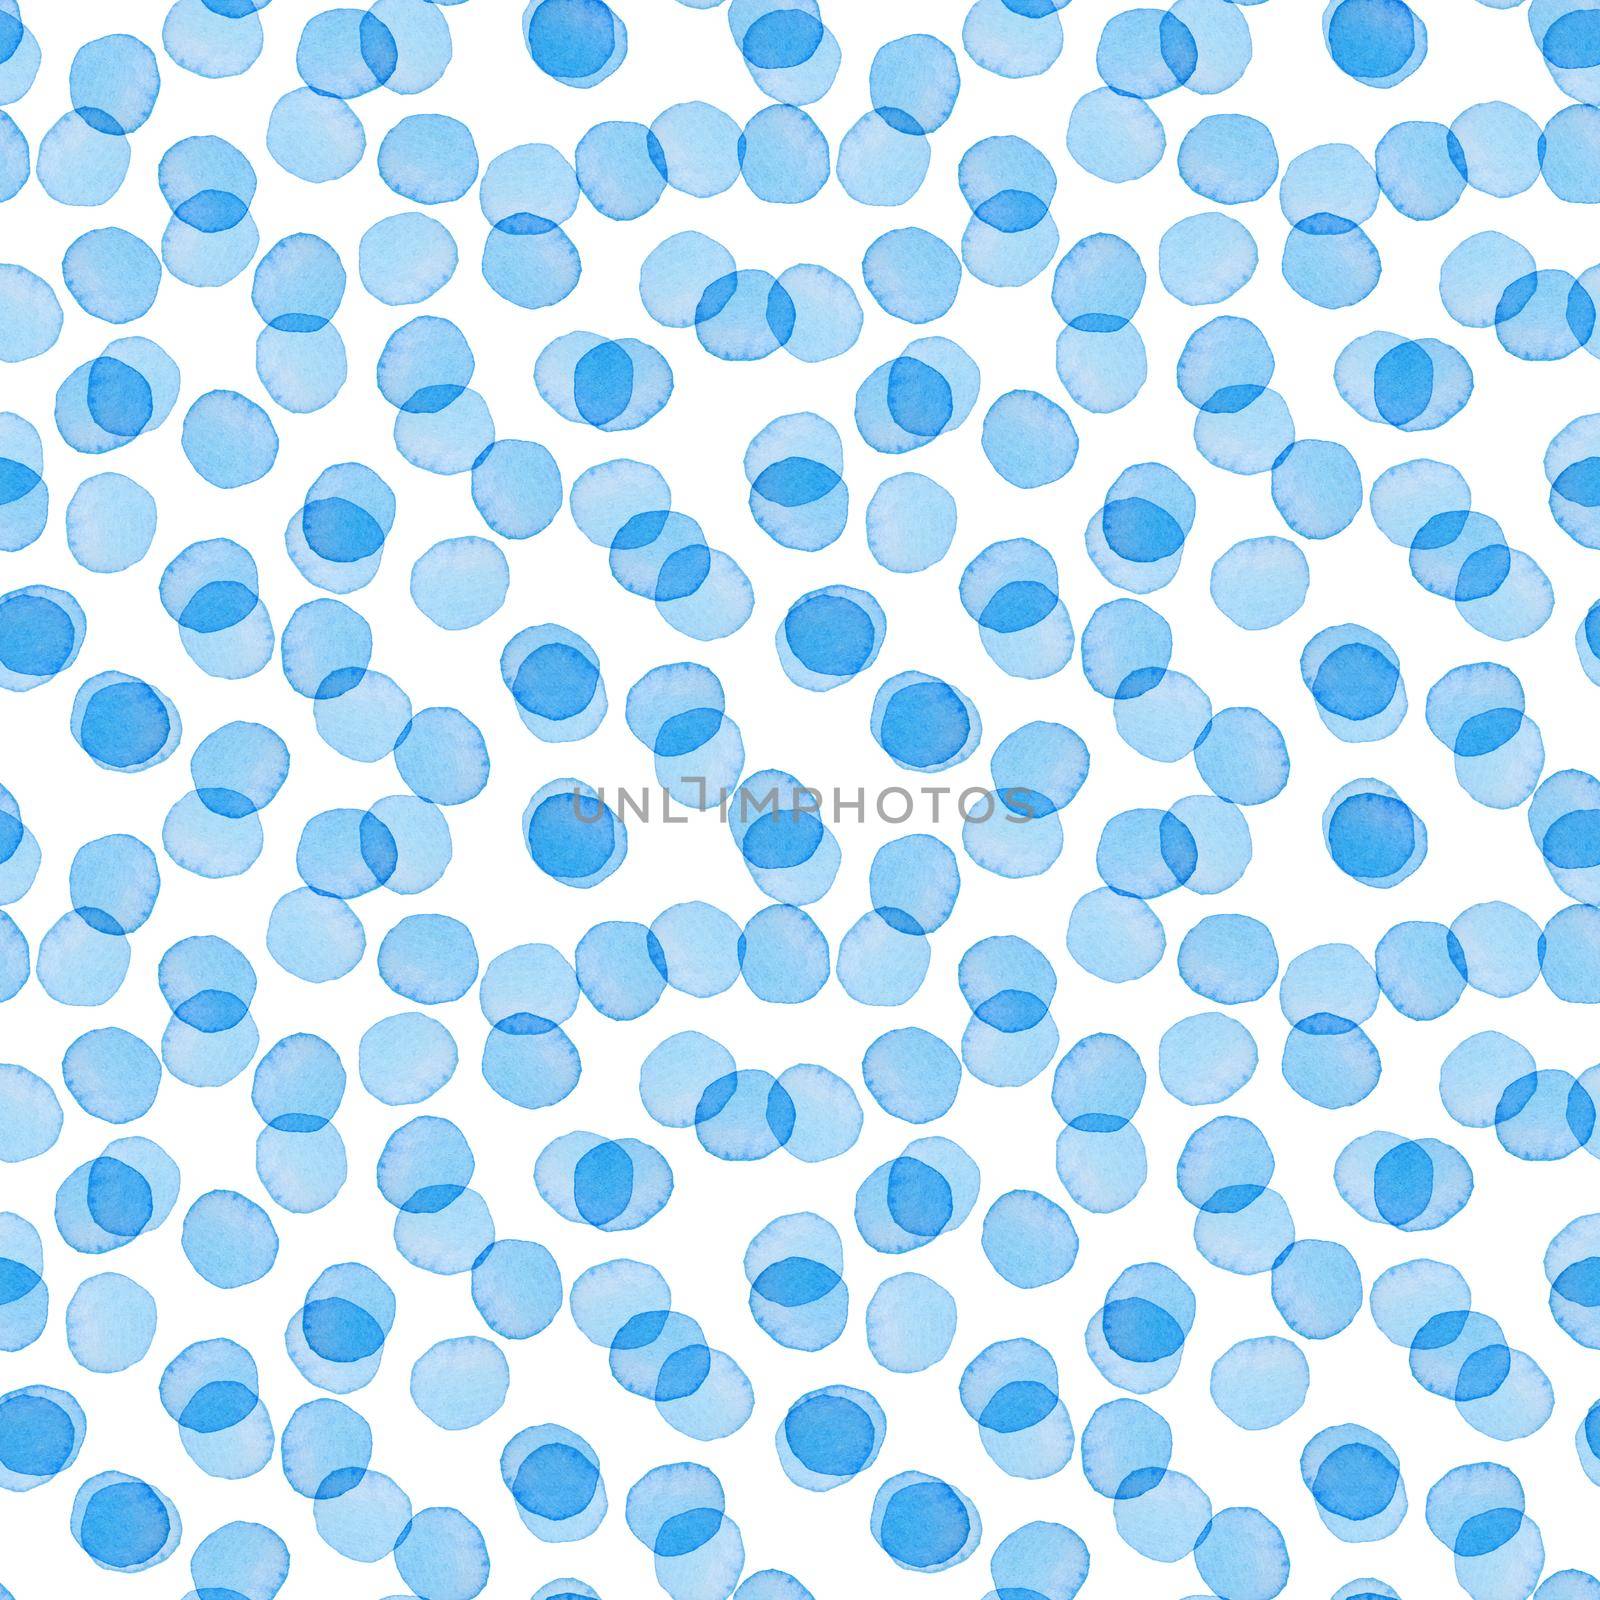 Hand Painted Brush Polka Dot Seamless Watercolor Pattern. Abstract watercolour Round Circles in Blue Color. Artistic Design for Fabric and Background by DesignAB